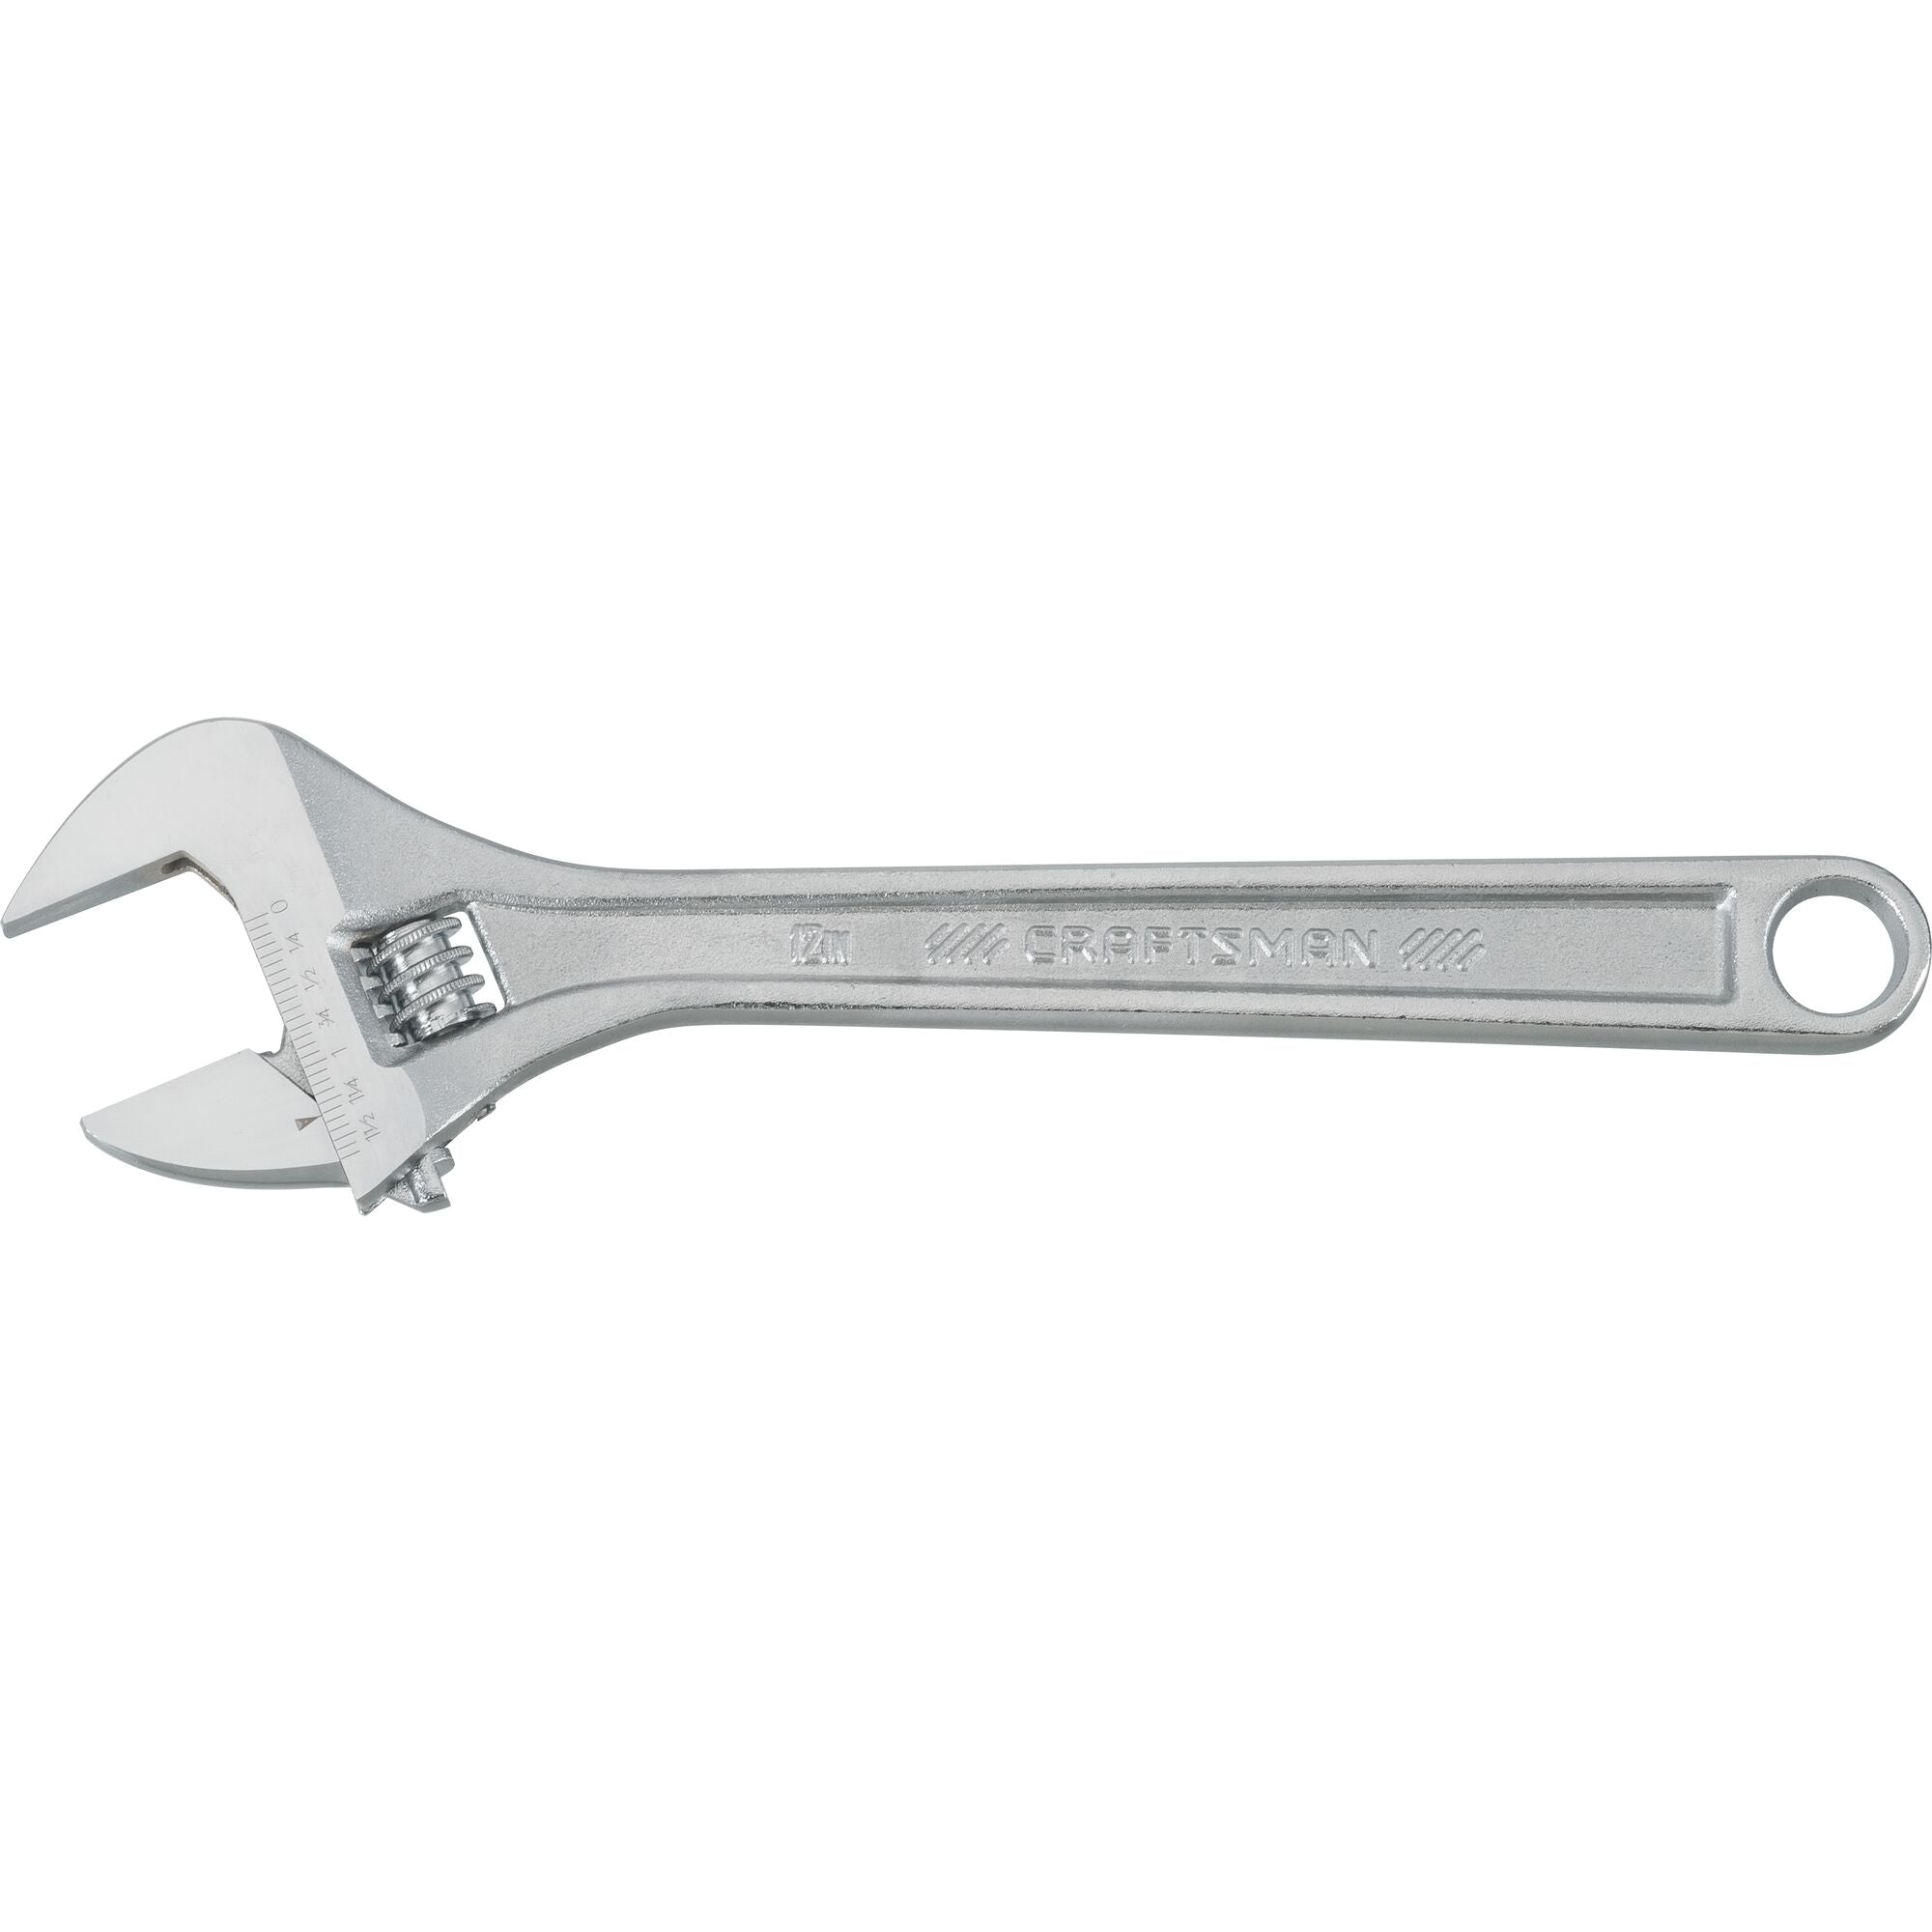 CLE A MOLETTE 12 / ADJUSTABLE WRENCH 12 - HADW131128 FP00341